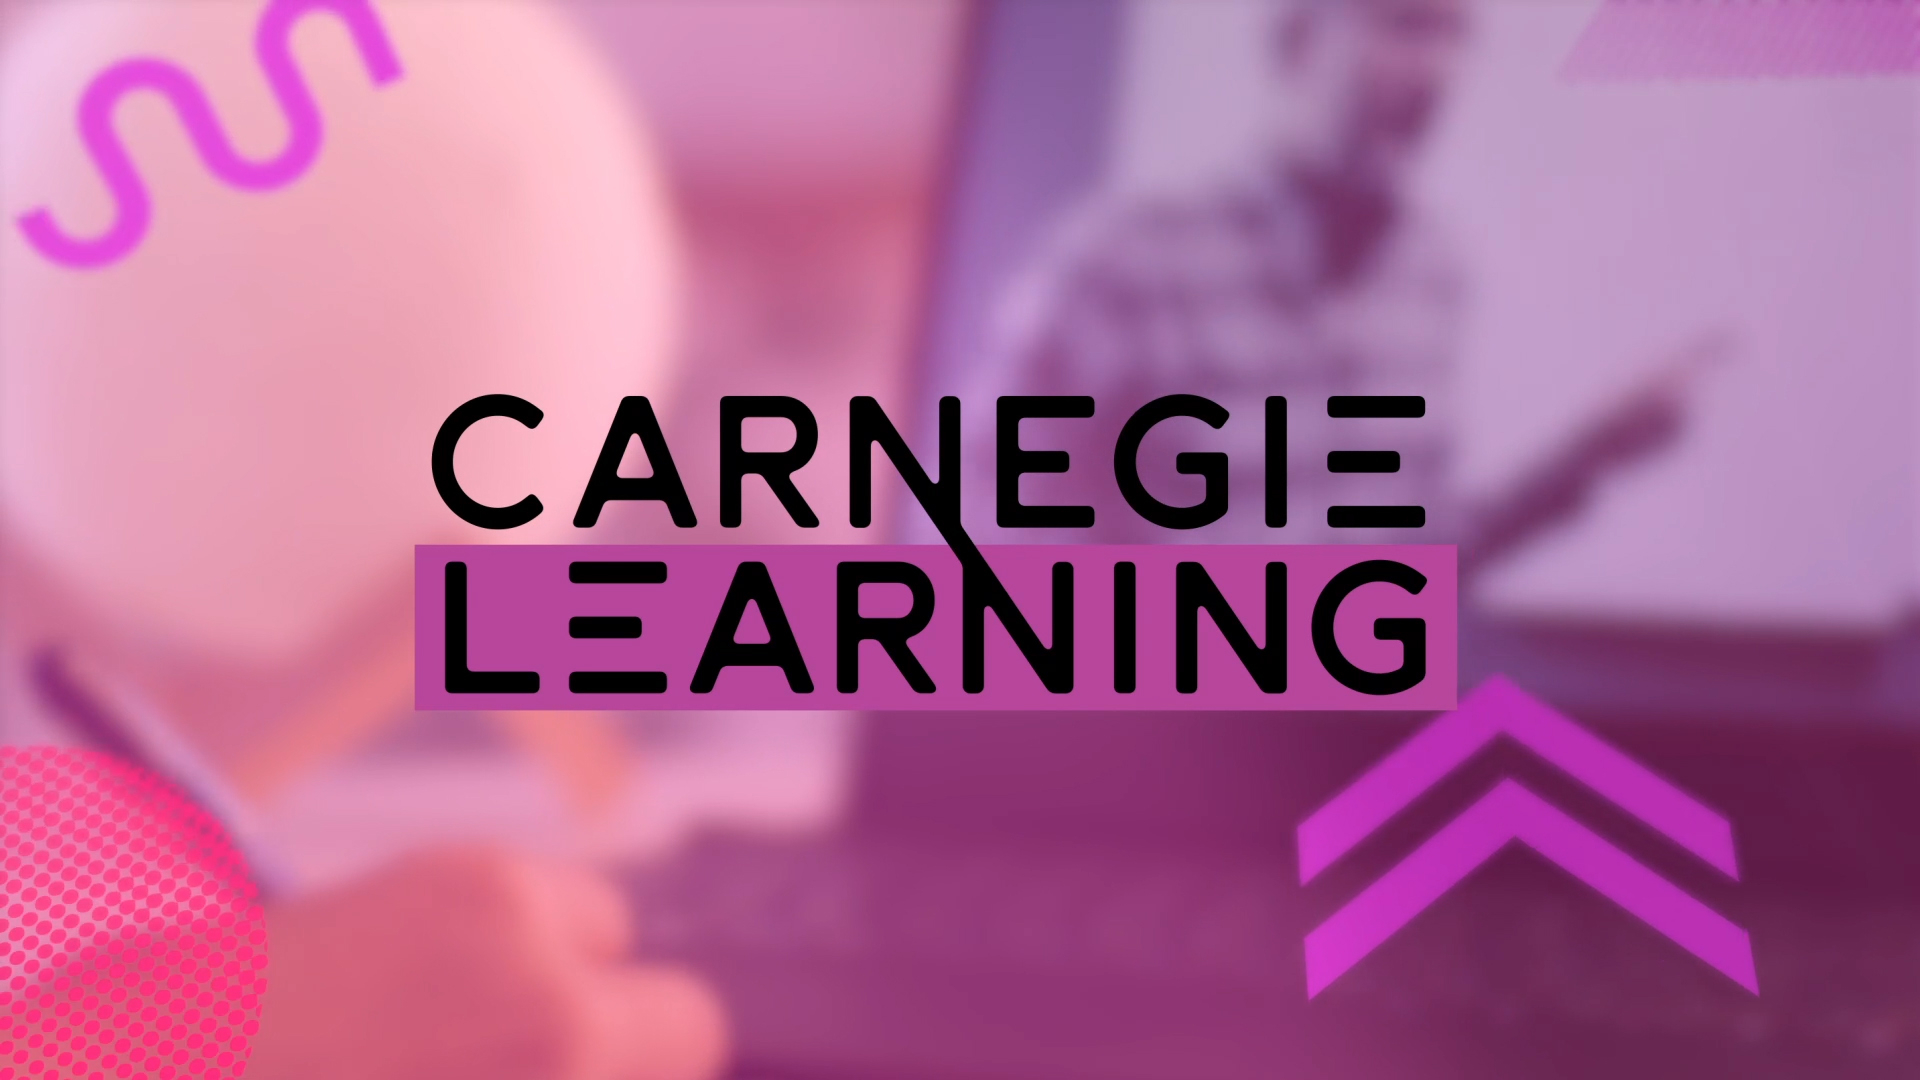 Carnegie Learning has one of the nation's largest K-12 high-dosage tutoring teams staffed by certified math and literacy instructors.